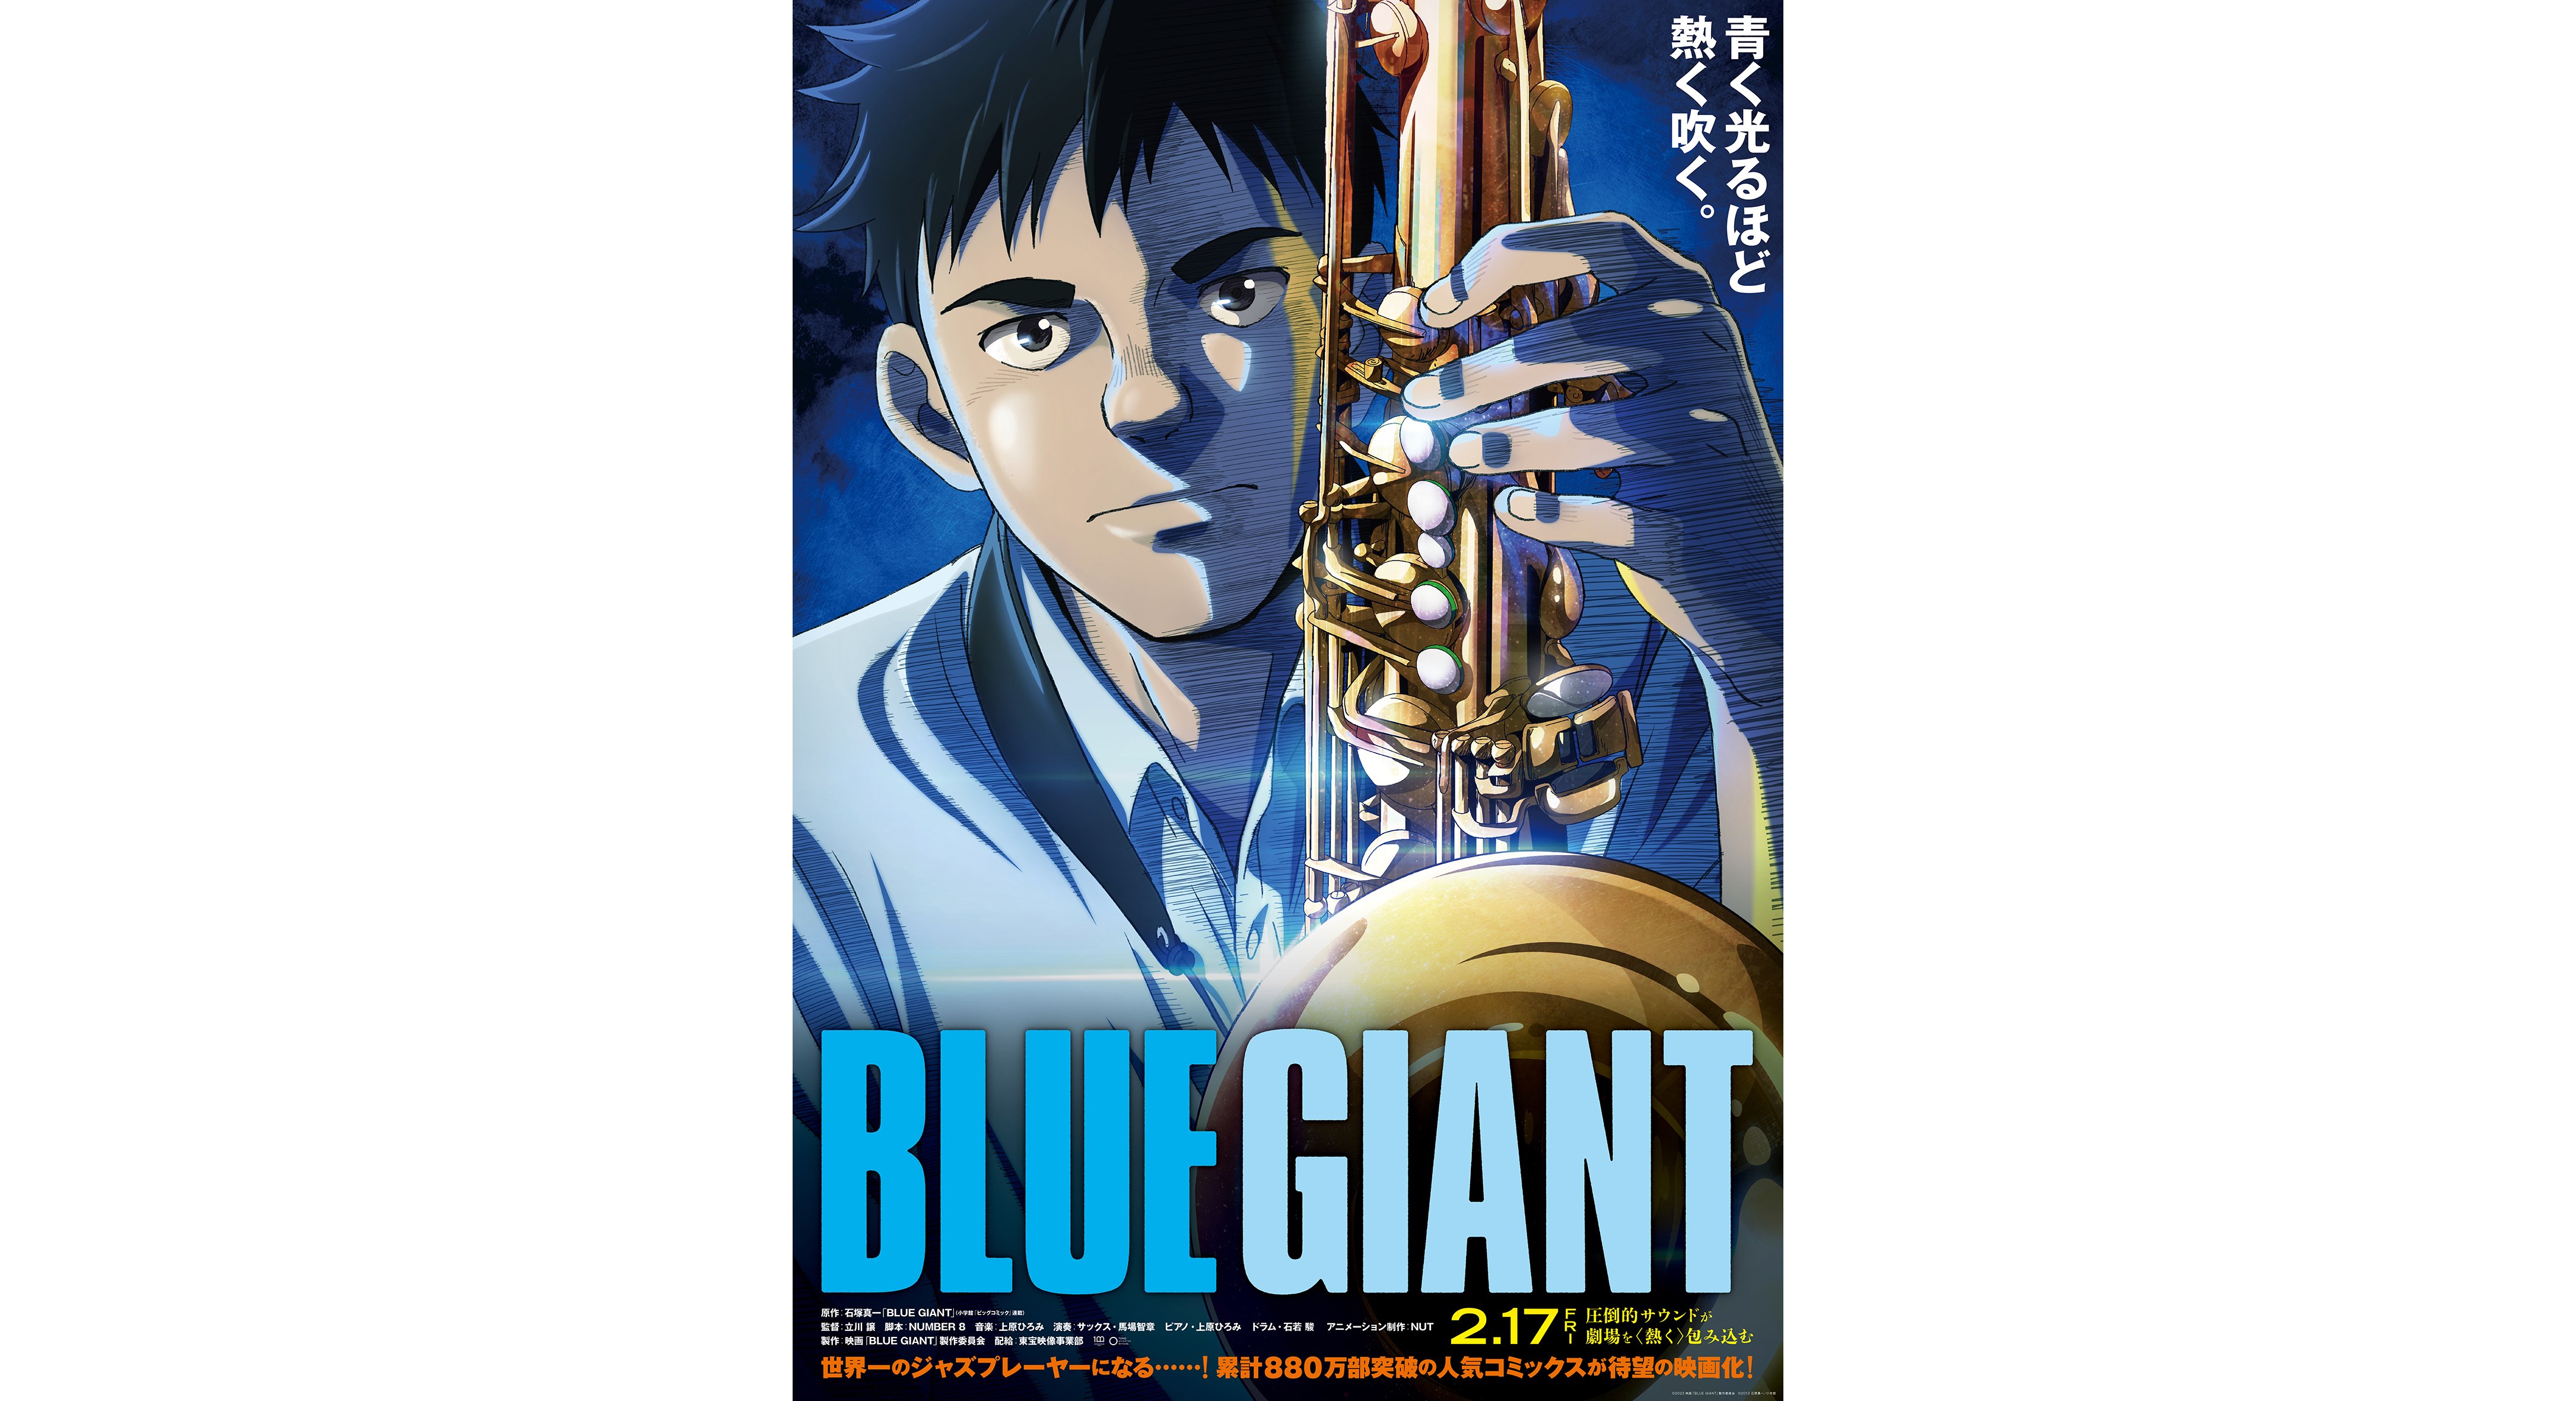 Depicting The Spirit of Jazz; Interview with “BLUE GIANT” Story Director  NUMBER 8 on His First Novel “Piano Man” and The Background of Its Creation  - TOKION